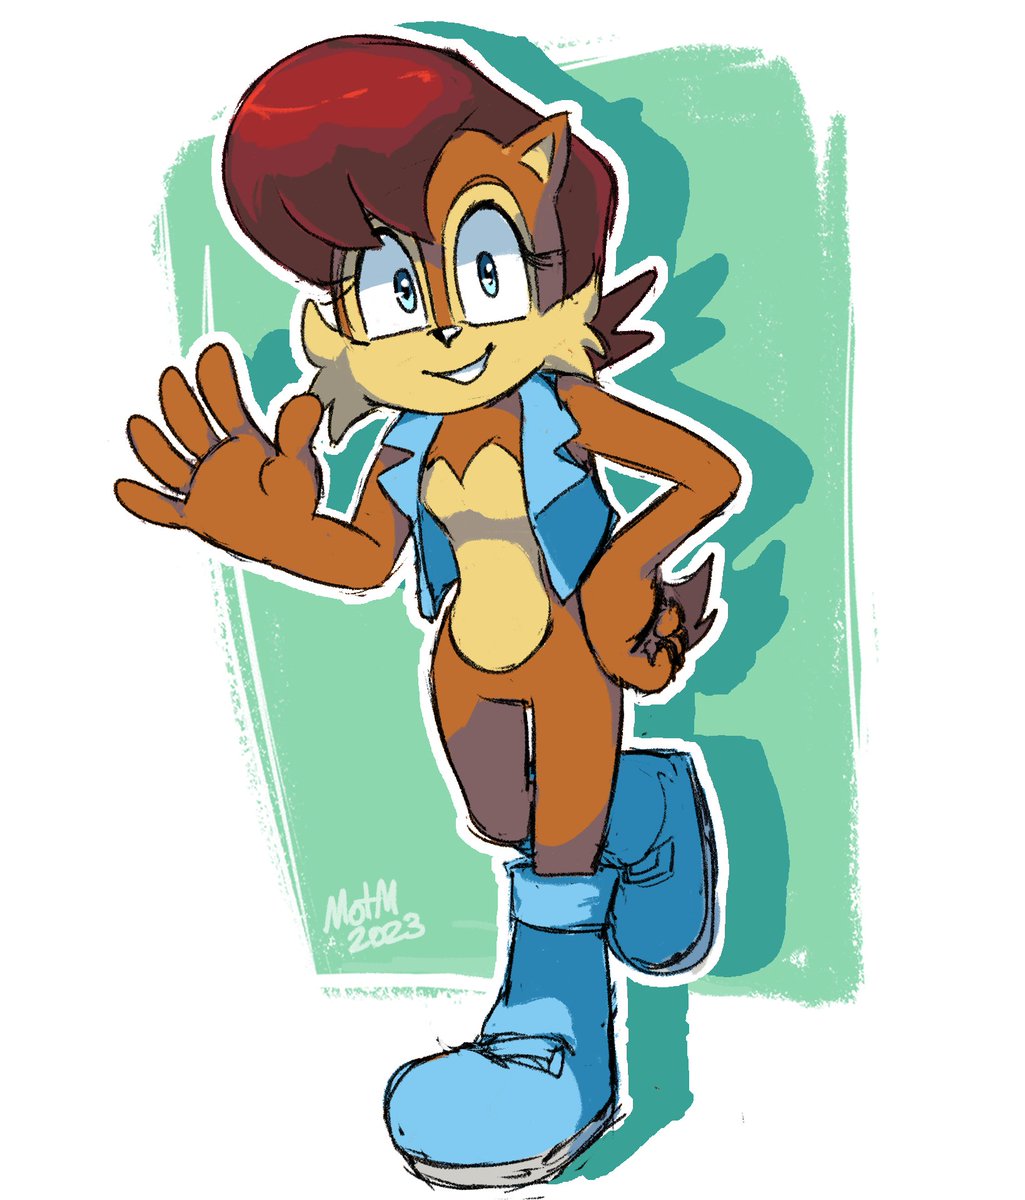 idk i was compelled to draw my favorite sonic character

#sallyacorn #sonicthehedgehog